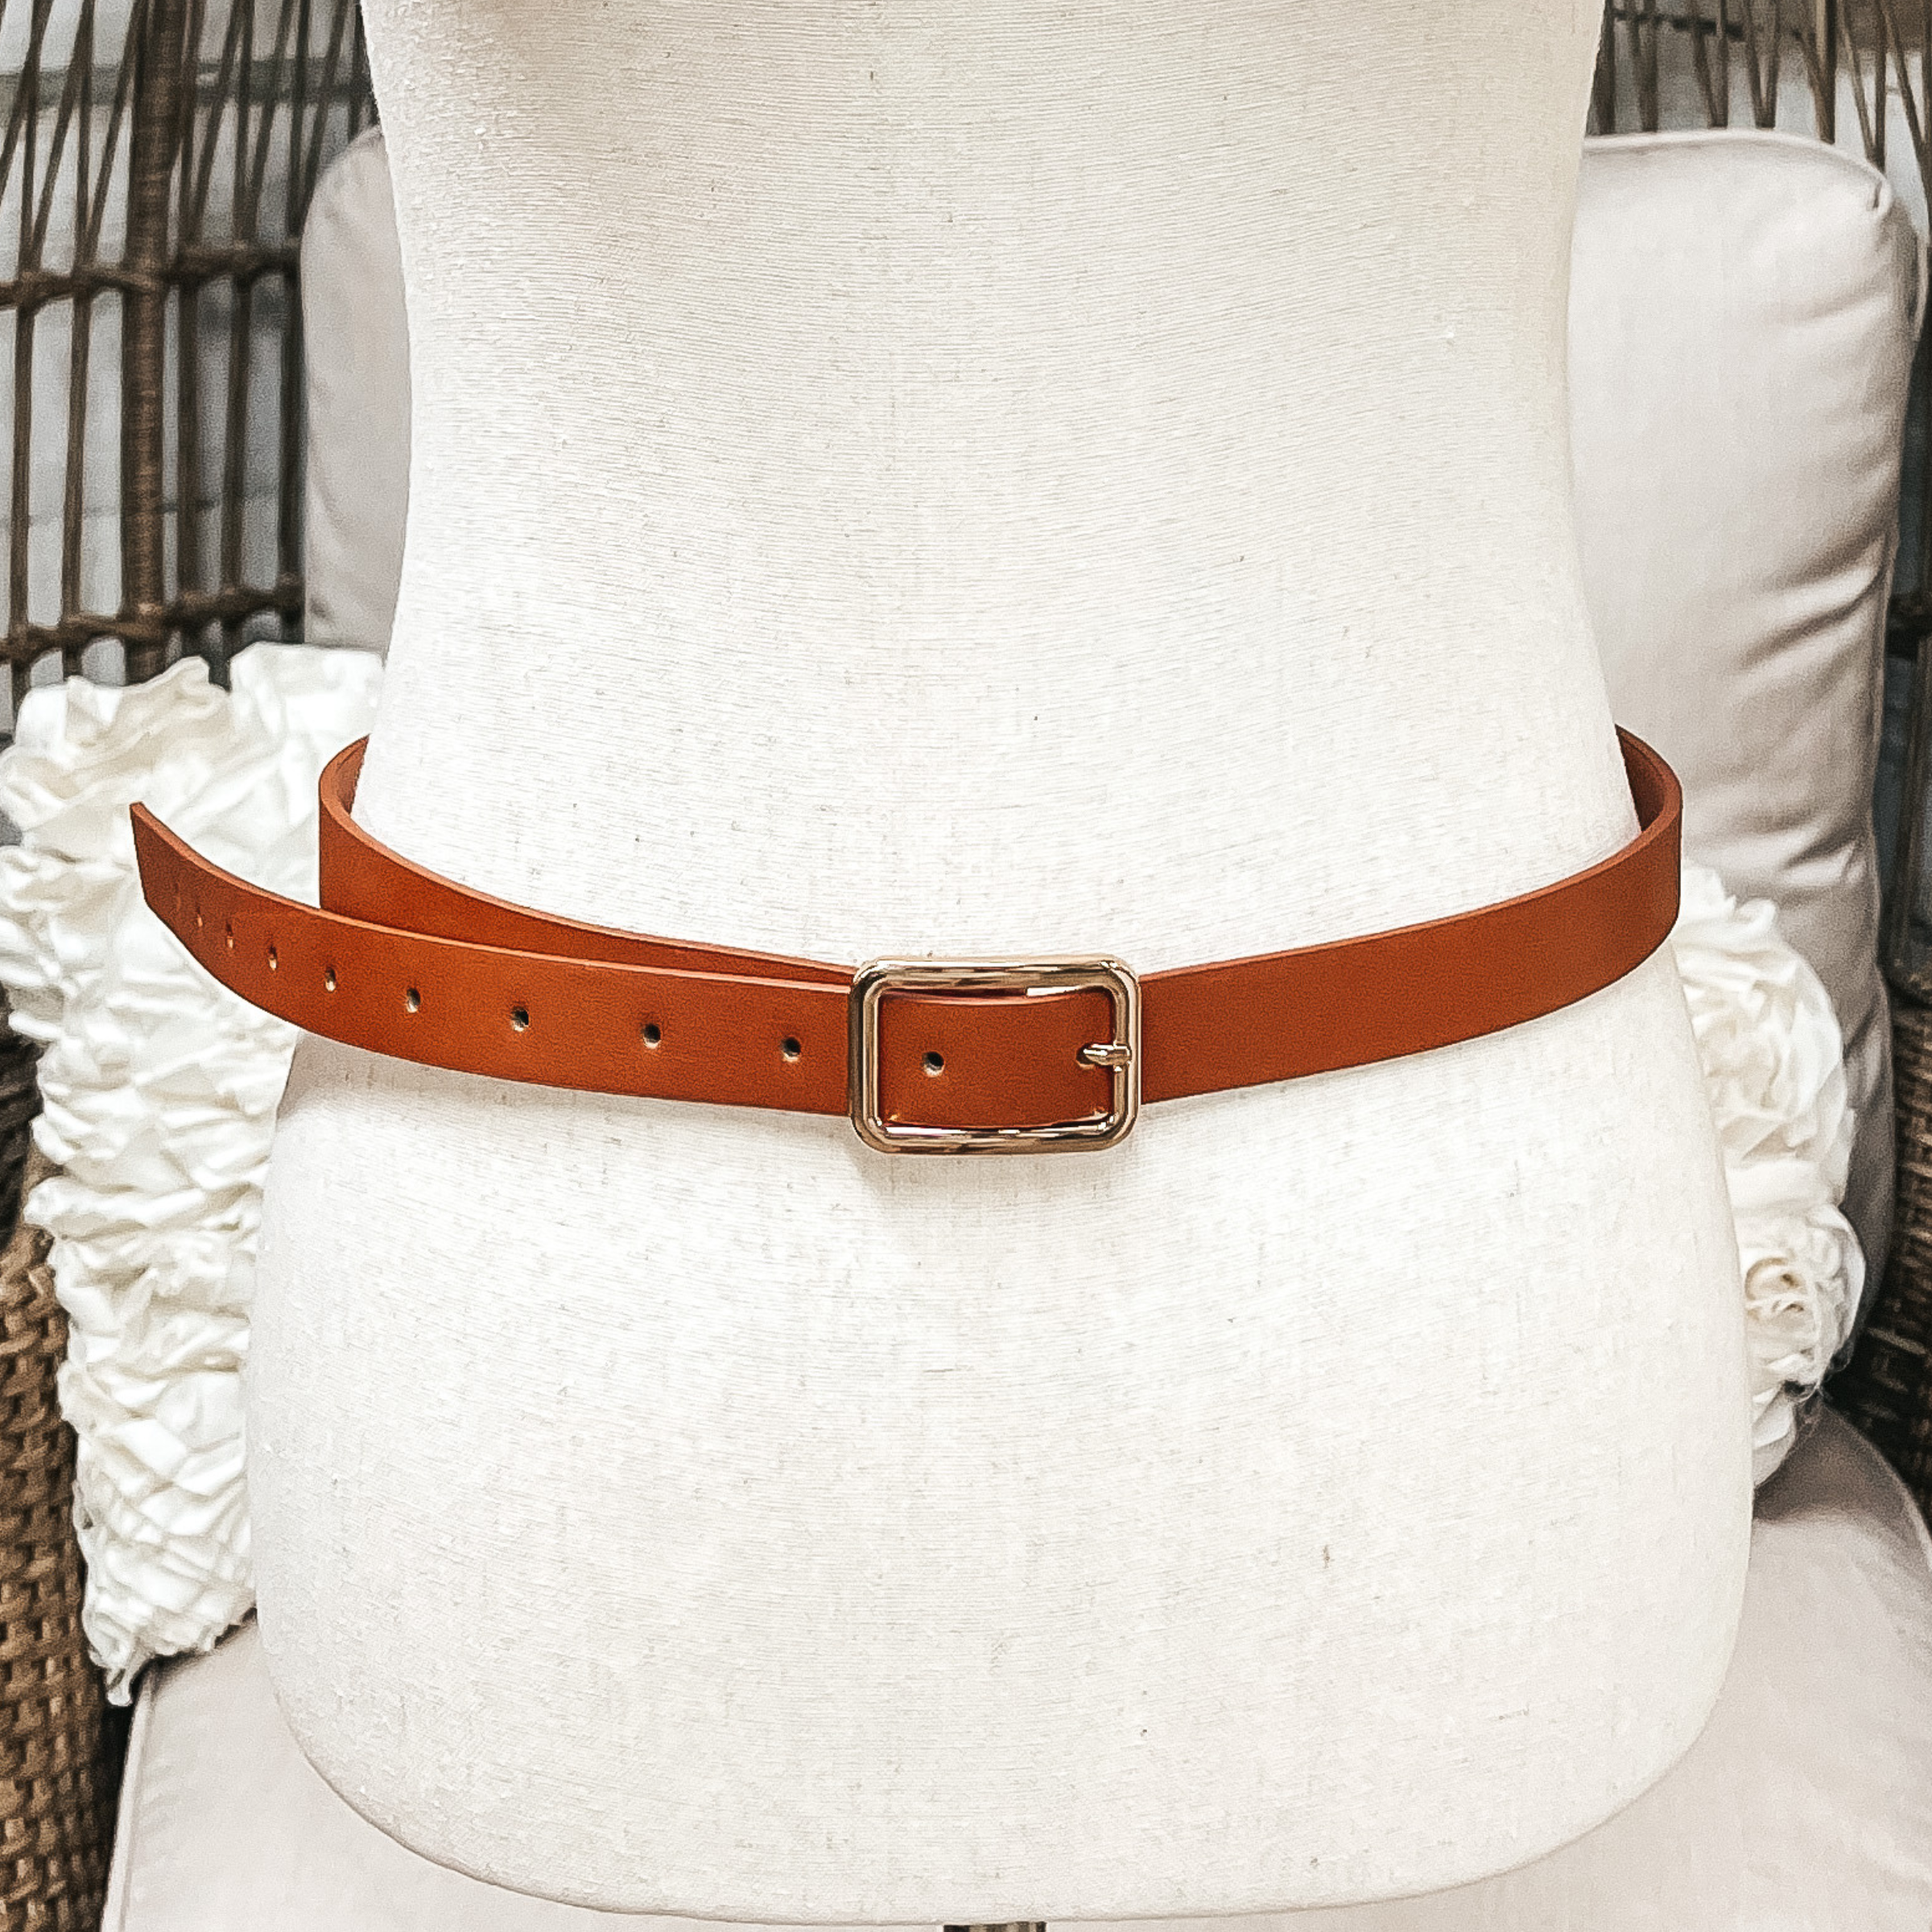 Set of Three | Skinny Fashion Belts in Black, Cognac, and Ivory - Giddy Up Glamour Boutique